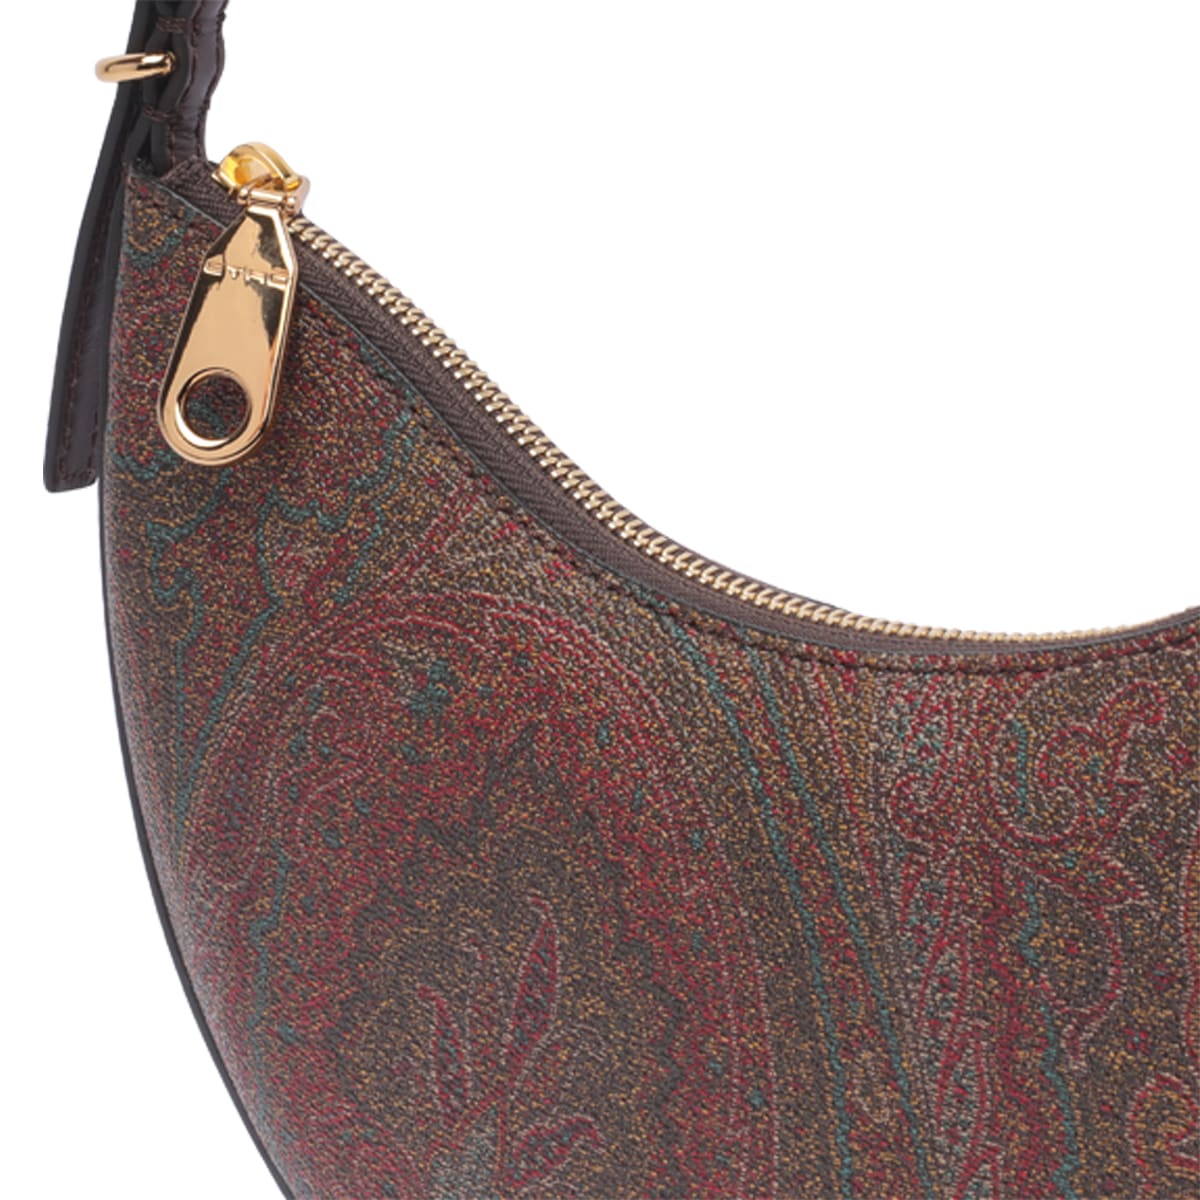 Shop Etro Small Hobo Bag In Brown